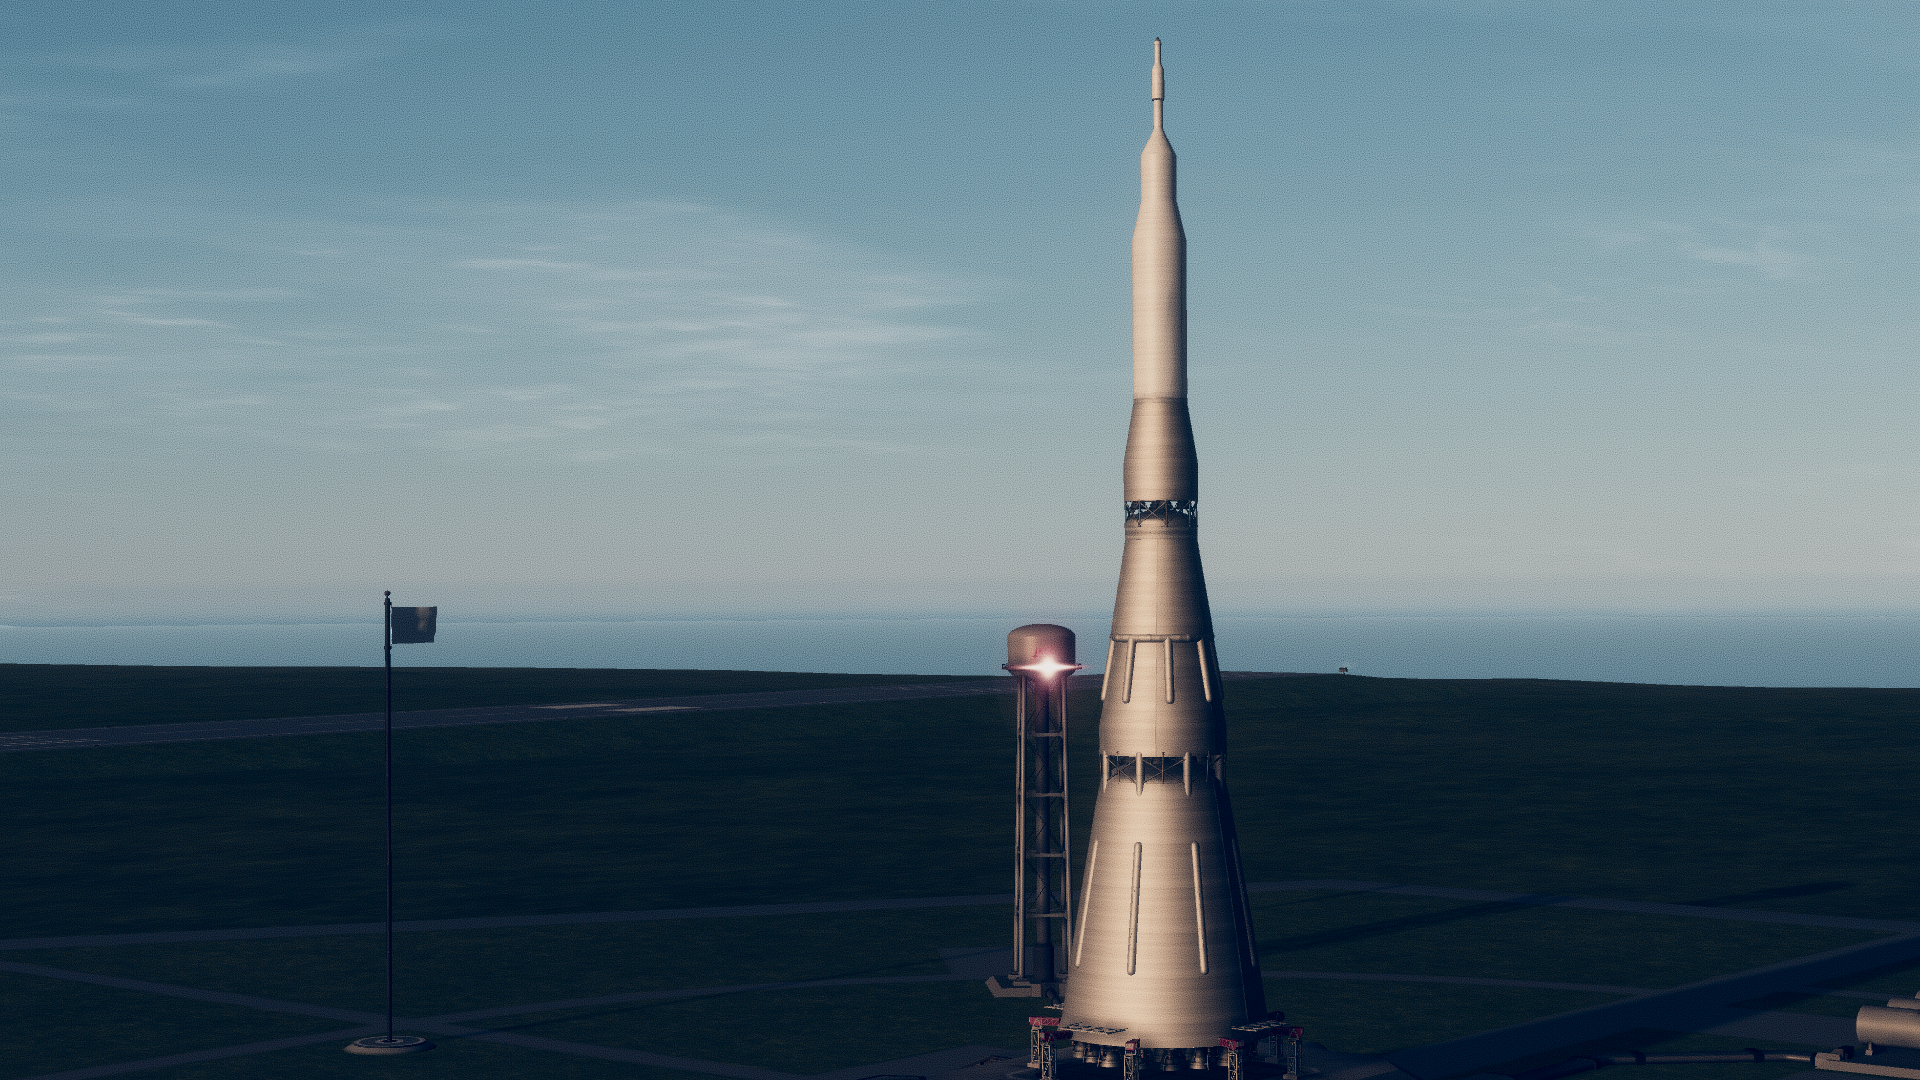 My new N1 rocket, its still getting improved but it looks much more realistic